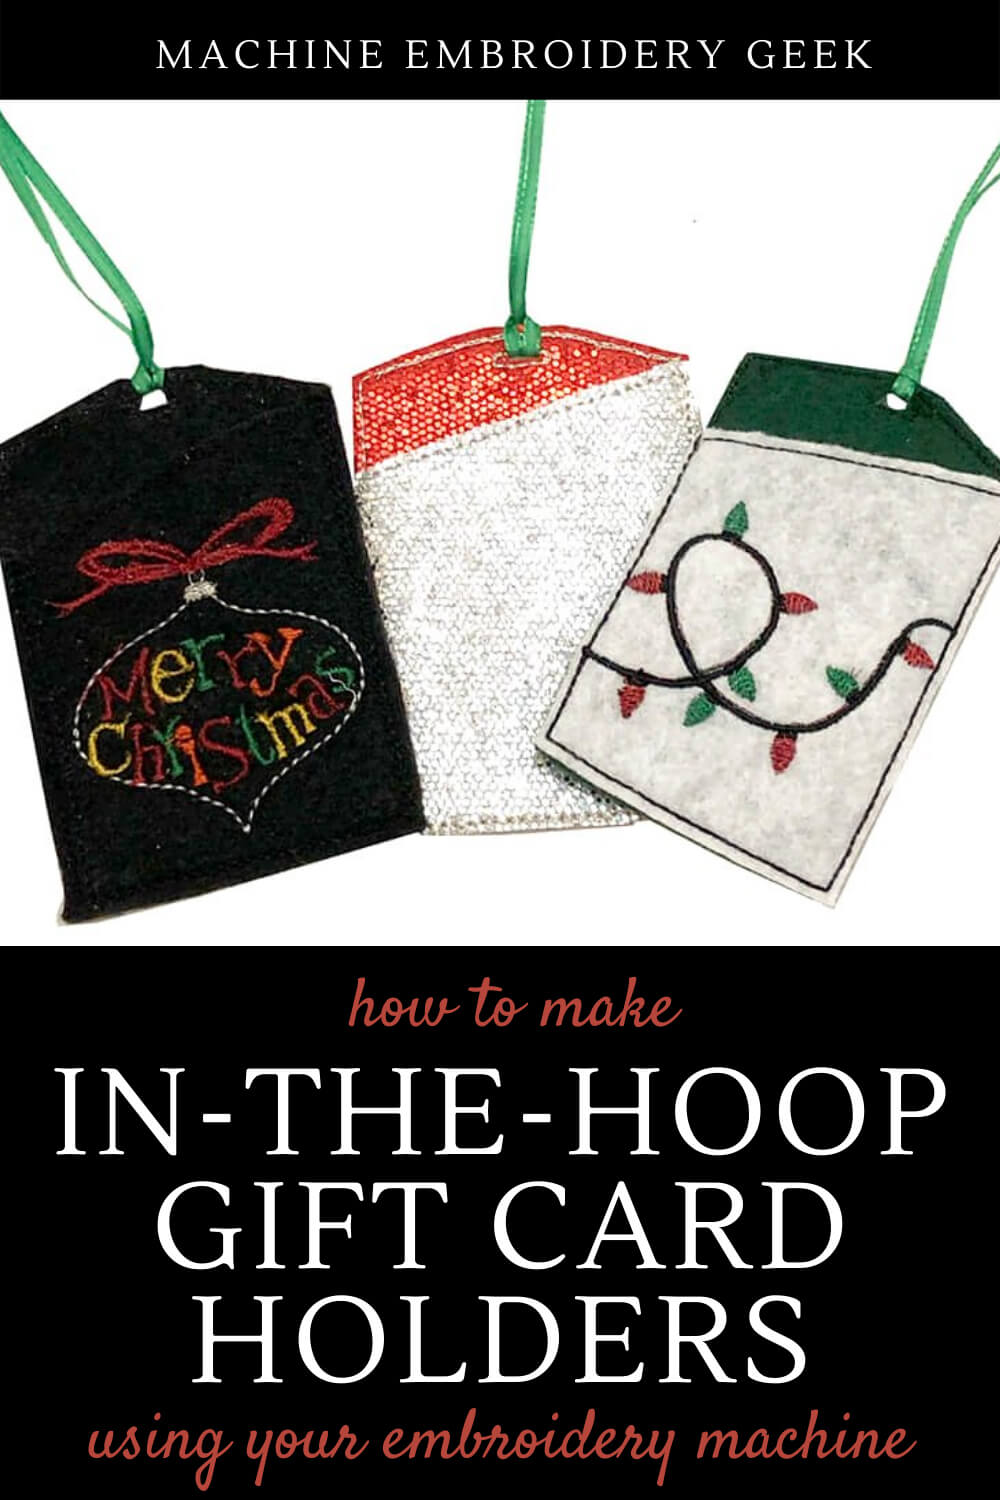 how to make an in-the-hoop gift card holder